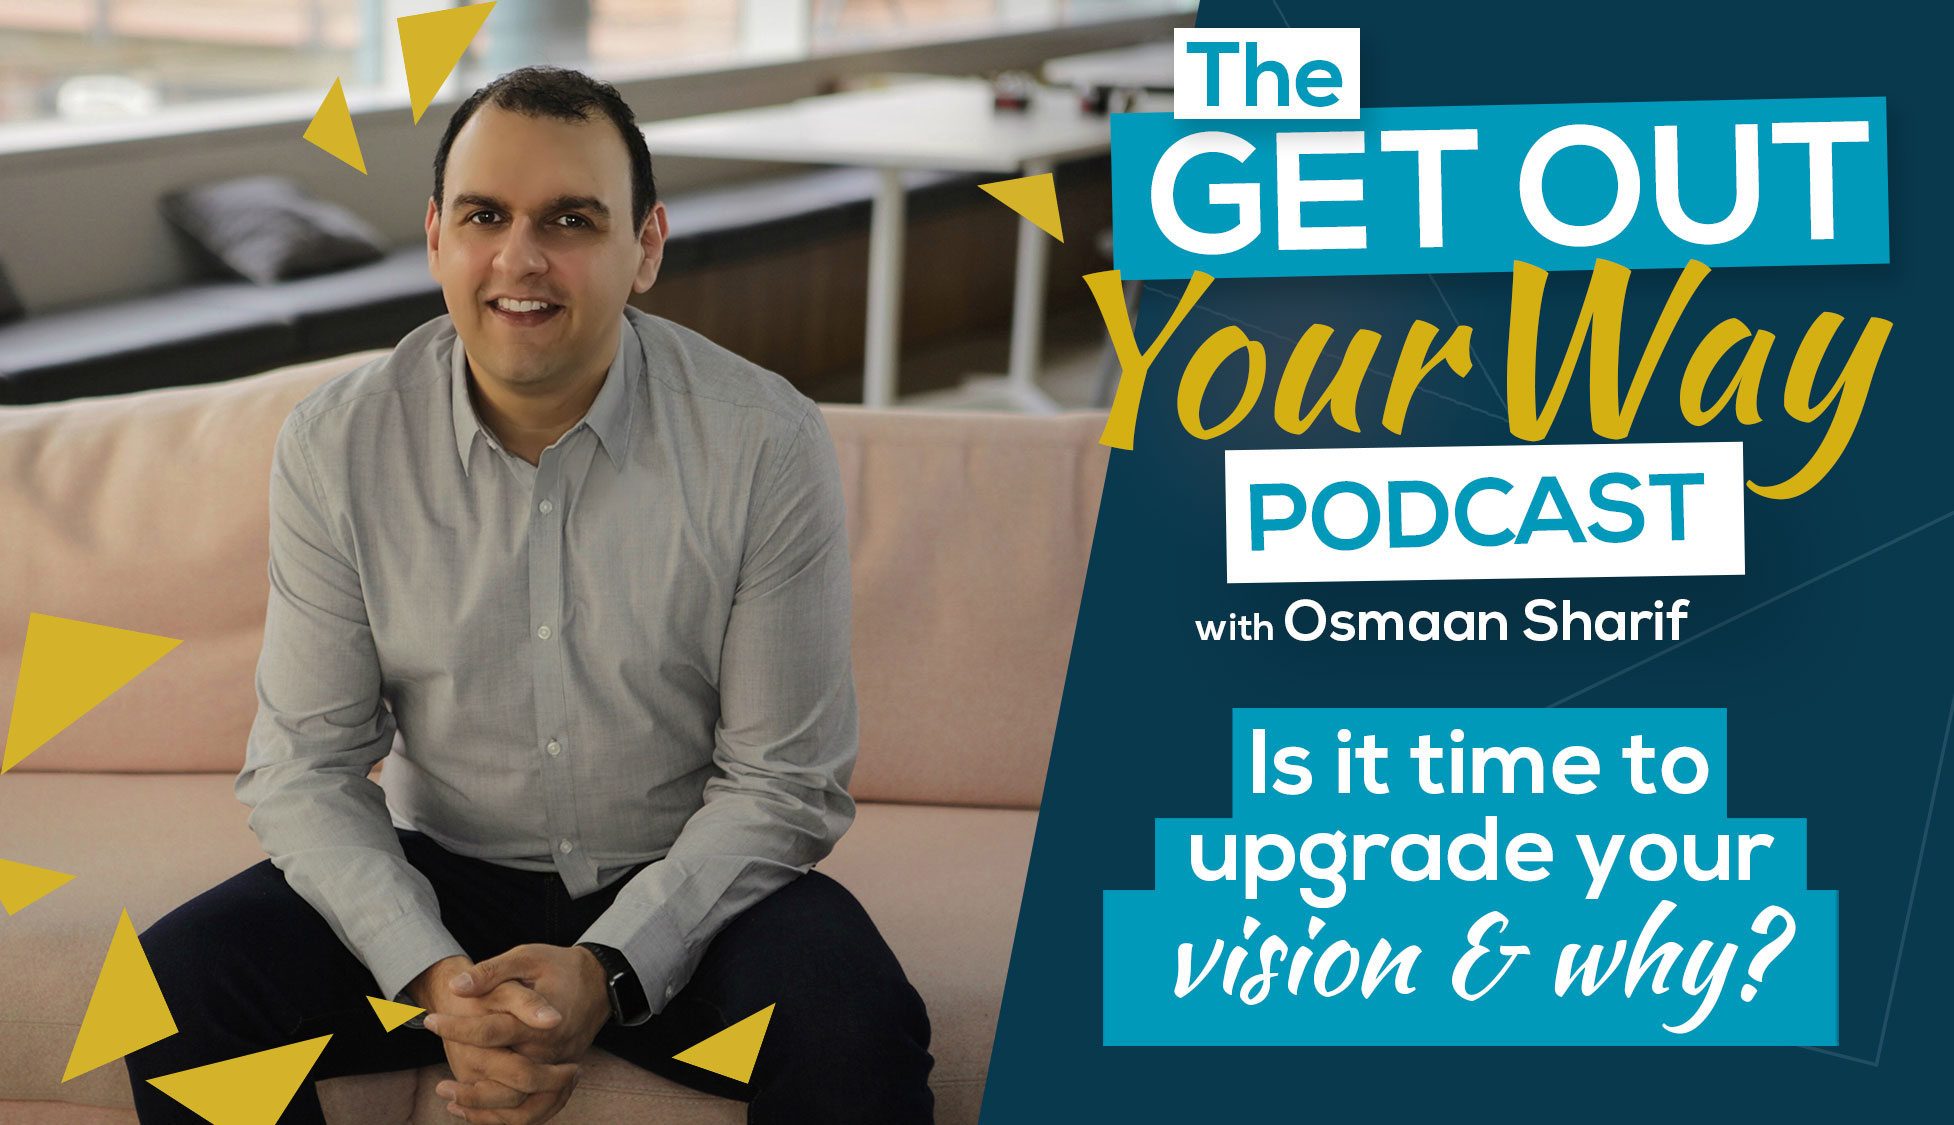 Is it time for you to upgrade your vision & why?